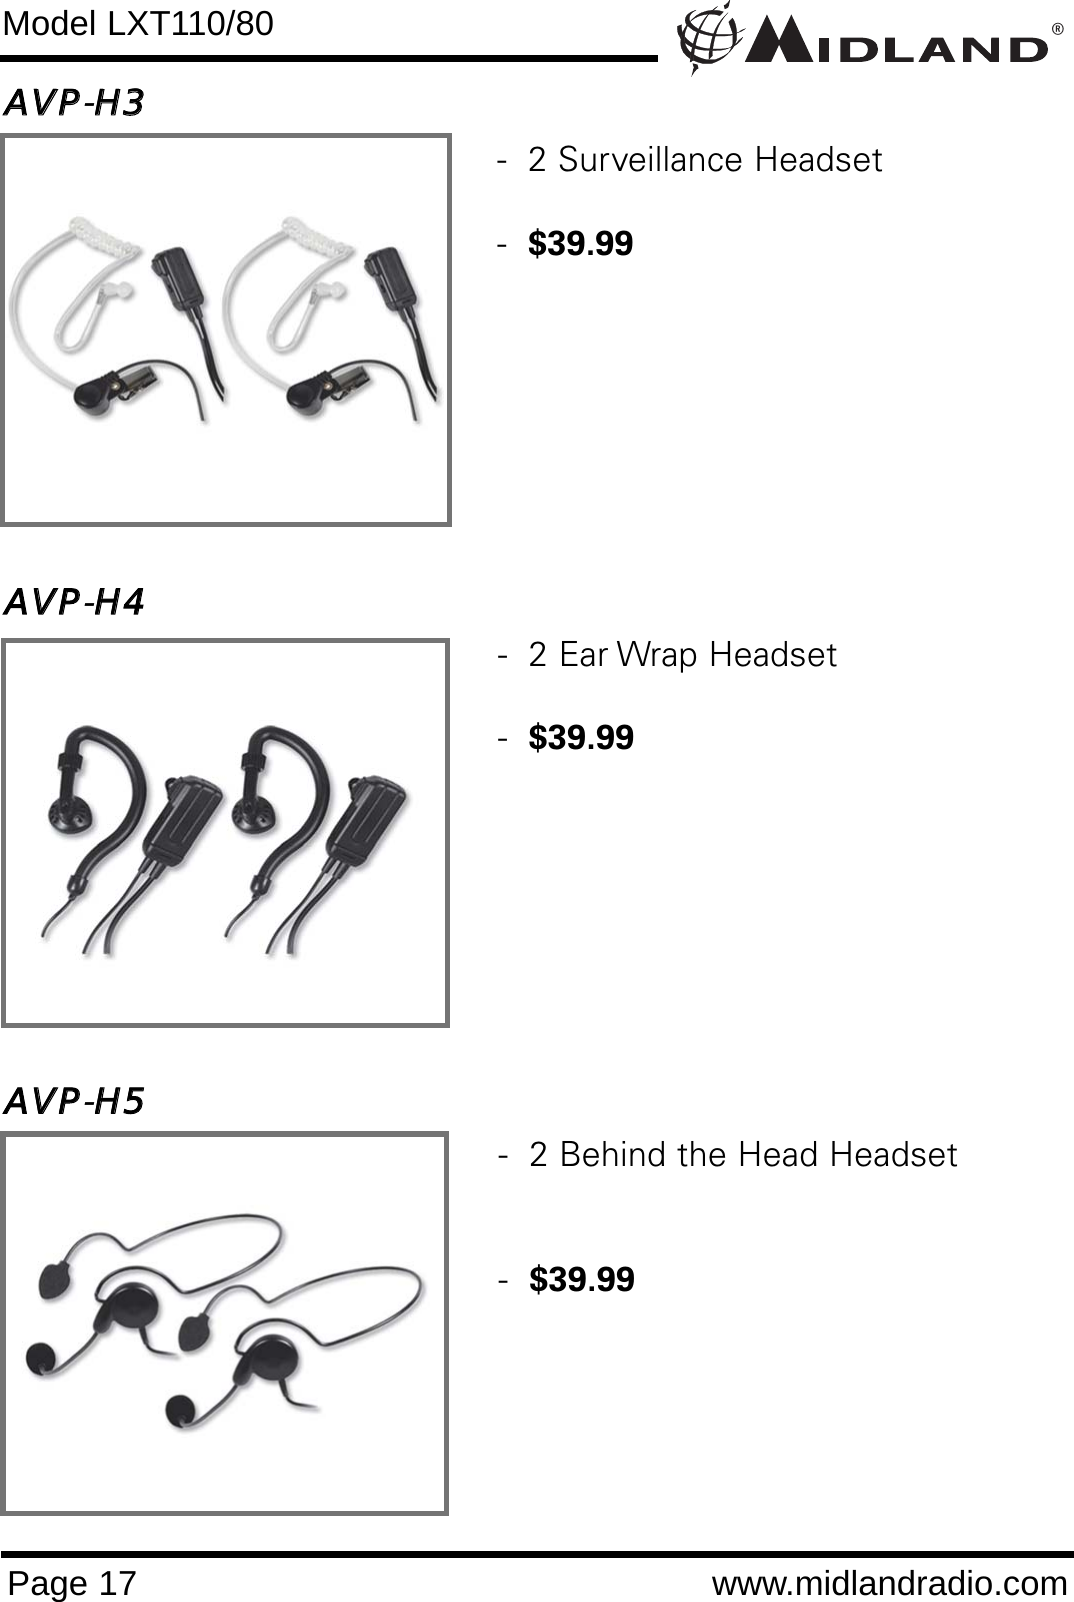 ®Page 17 www.midlandradio.comModel LXT110/80AAVVPP-HH33AAVVPP-HH44AAVVPP-HH55-  2 Behind the Head Headset -  $39.99-  2 Ear Wrap Headset-  $39.99-  2 Surveillance Headset-  $39.99